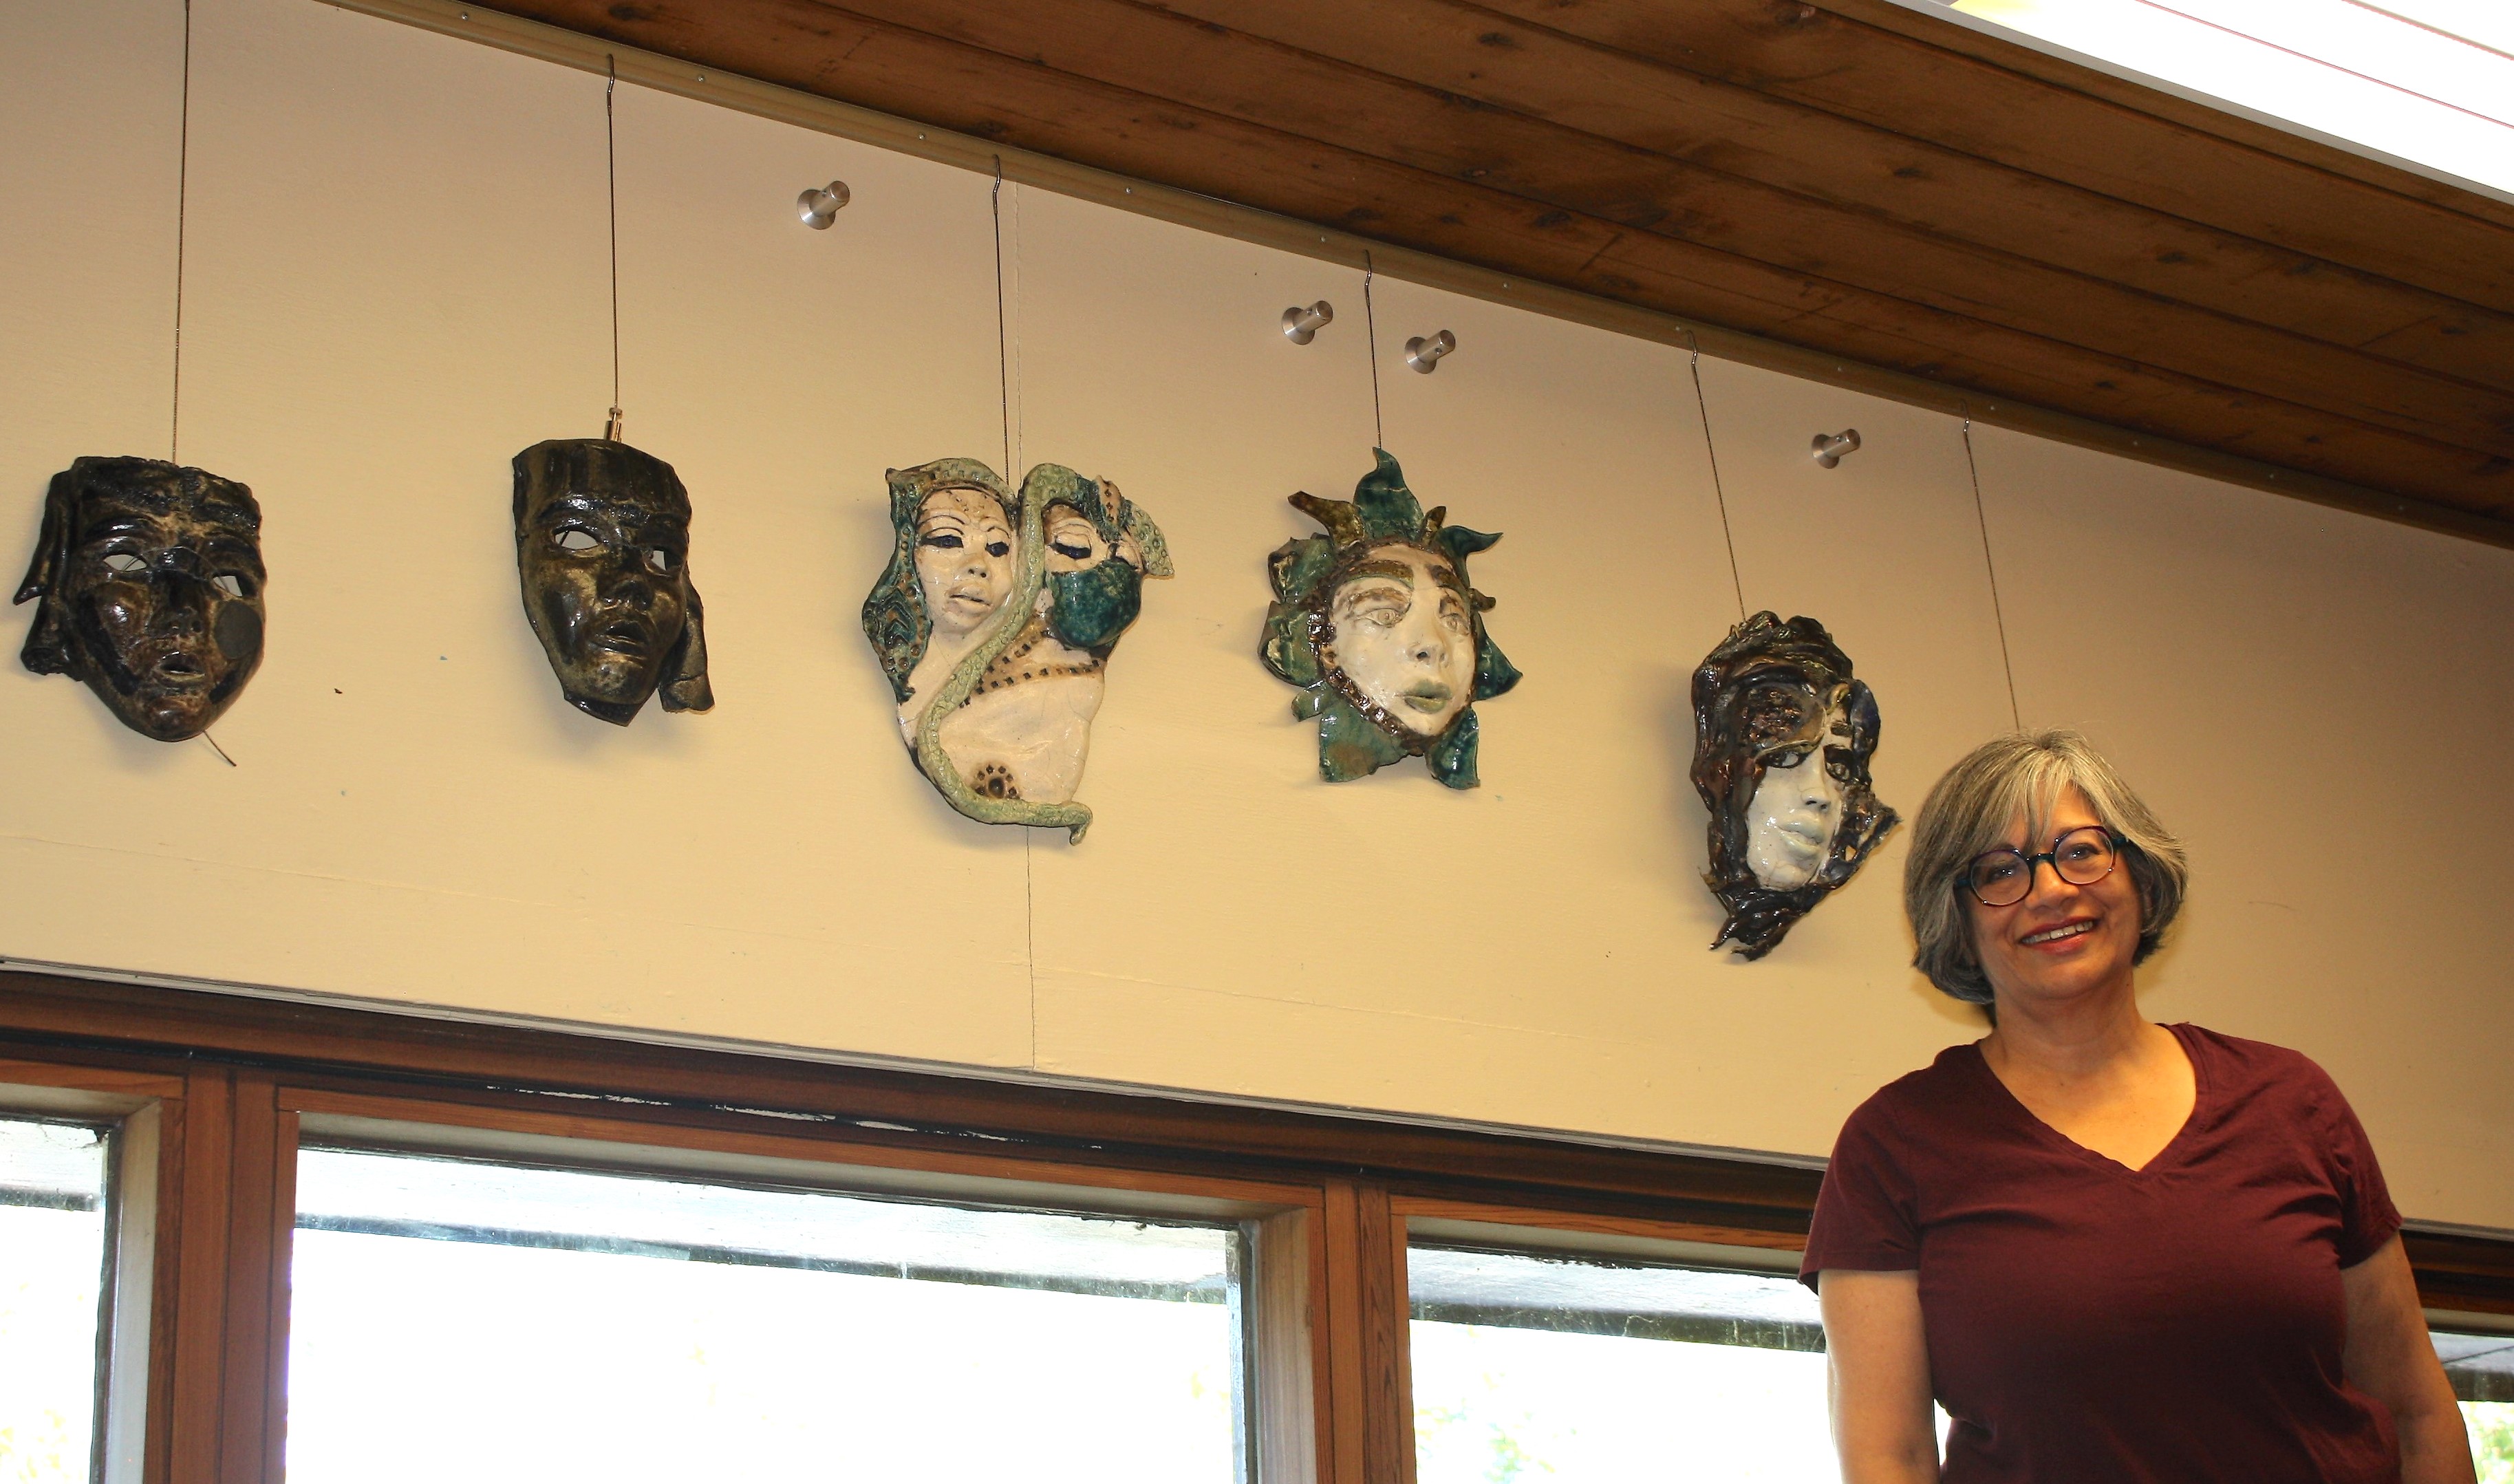 Shaheen Shariff with five artistic masks she made